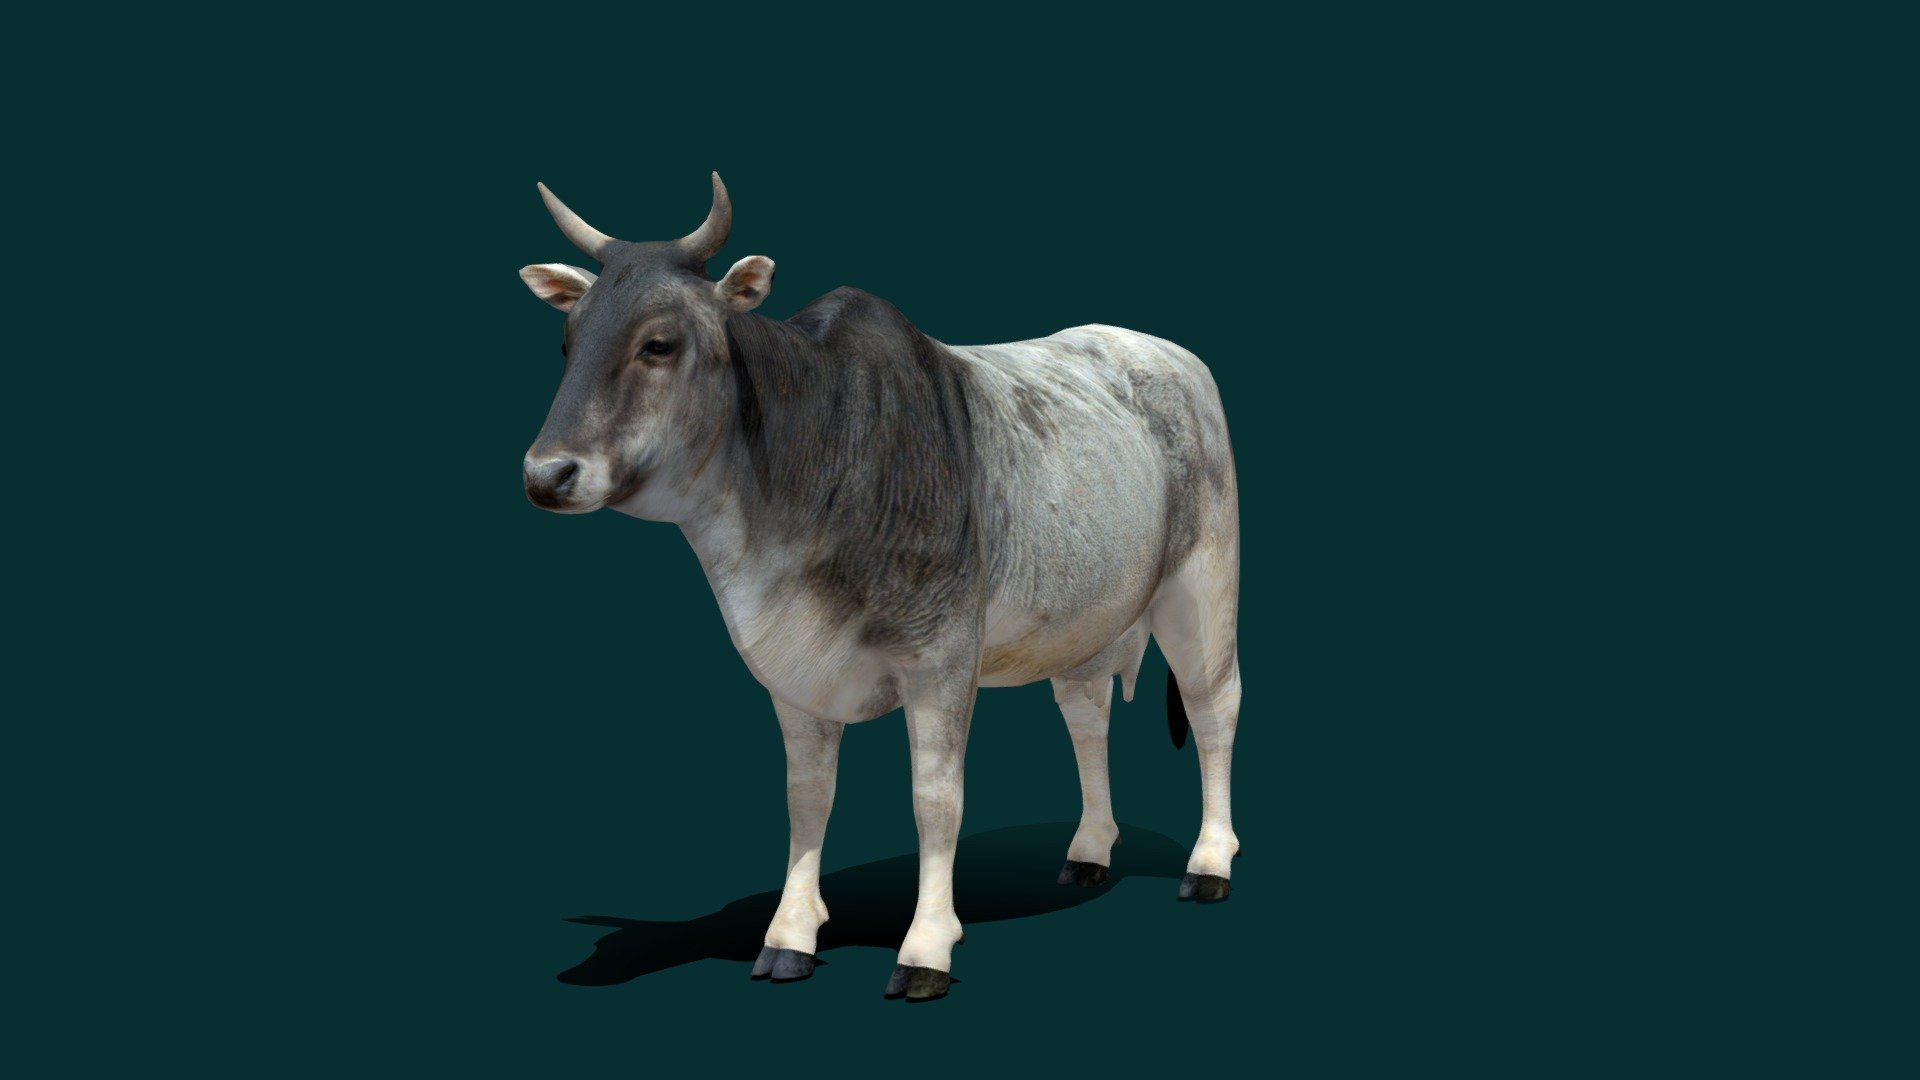 Zebu Cattle  (Humped Cattle)  

Bos taurus indicus Asian Zebu Cattle Breed (Domestic Cow )

1 Draw Calls

GameReady 

13 Animations

4K PBR Textures Material

Unreal FBX

Unity FBX  

Blend File 

USDZ File (AR Ready). Real Scale Dimension

Textures Files

GLB File

Gltf File ( Spark AR, Lens Studio(SnapChat) , Effector(Tiktok) , Spline, Play Canvas ) Compatible



Triangles : 6484

Vertices  : 3261

Faces     : 3274 

Edges     : 6530
 Diffuse , Metallic, Roughness , Normal Map ,Specular Map,AO

The zebu, sometimes known in the plural as indicine cattle or humped cattle, is a species or subspecies of domestic cattle originating in South Asia. Zebu, like many Sanga cattle breeds, differs from taurine cattle by a fatty hump on their shoulders, a large dewlap, and sometimes drooping ears. Wikipedia
Scientific name: Bos taurus indicus
 - Asian Zebu Cattle (Low Poly) - 3D model by Nyilonelycompany 3d model